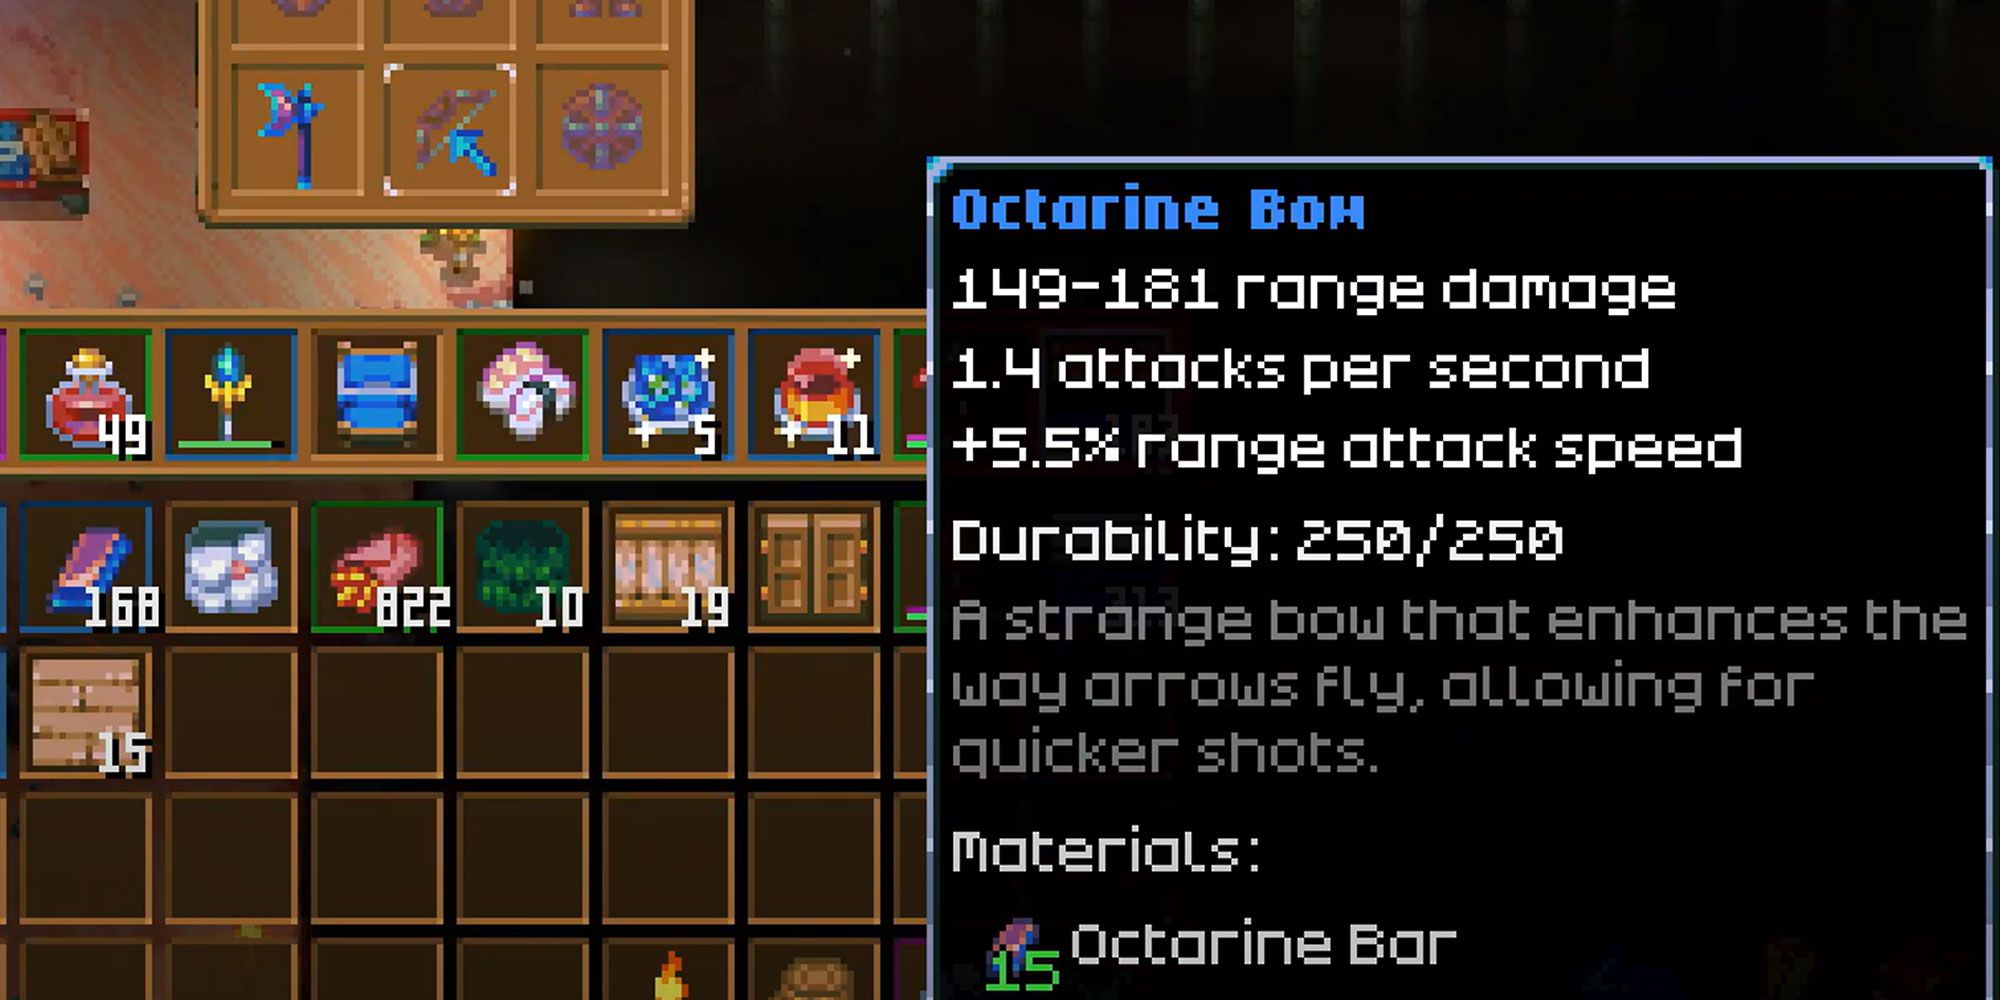 The Octarine Bow in Core Keeper